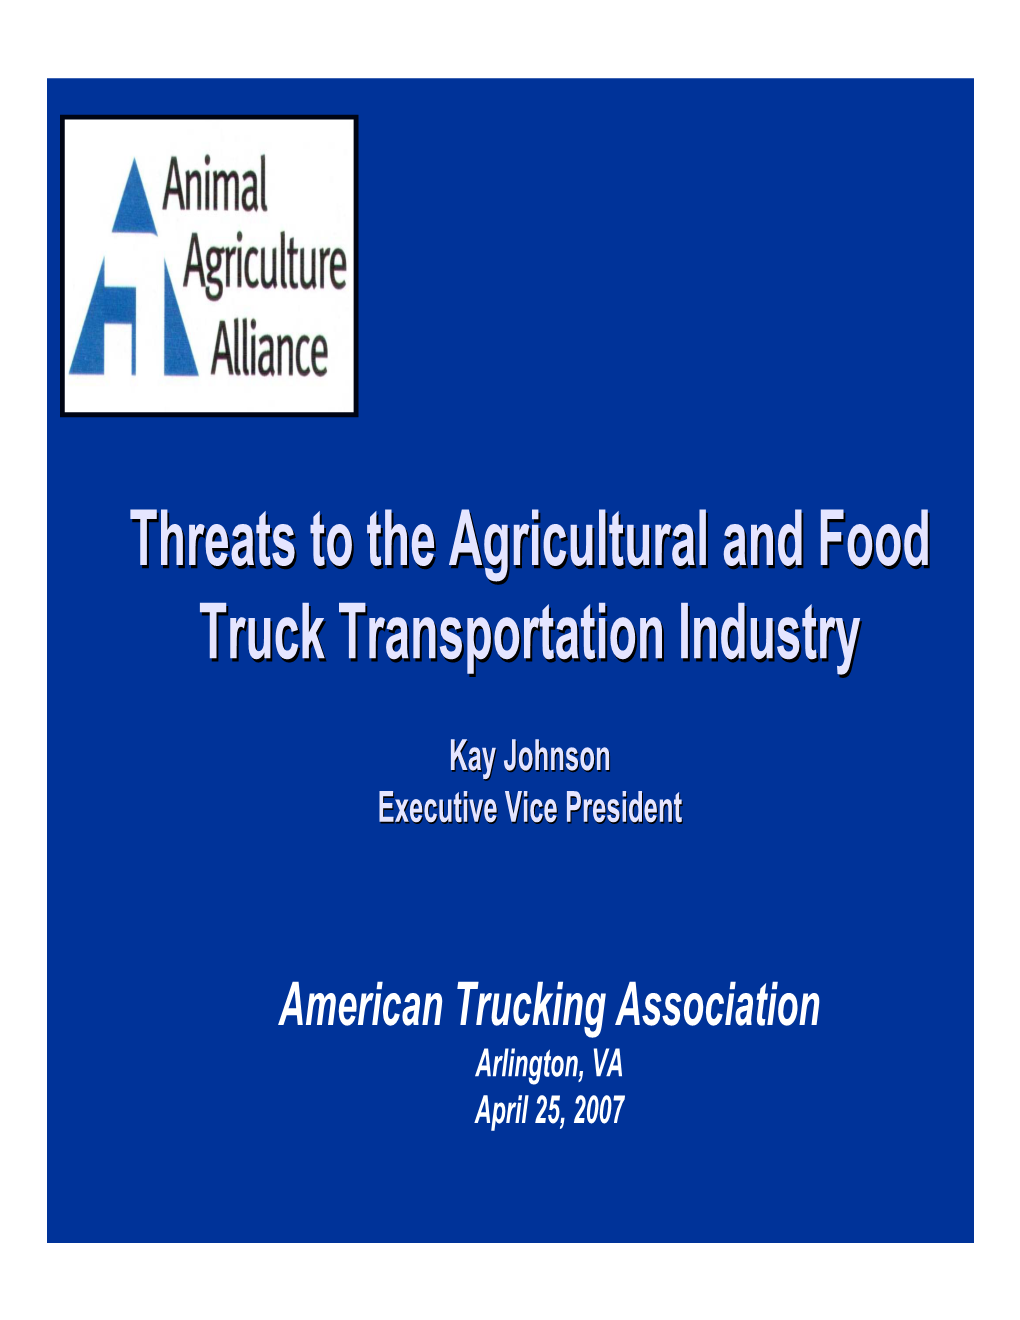 Threats to the Agricultural and Food Truck Transportation Industry